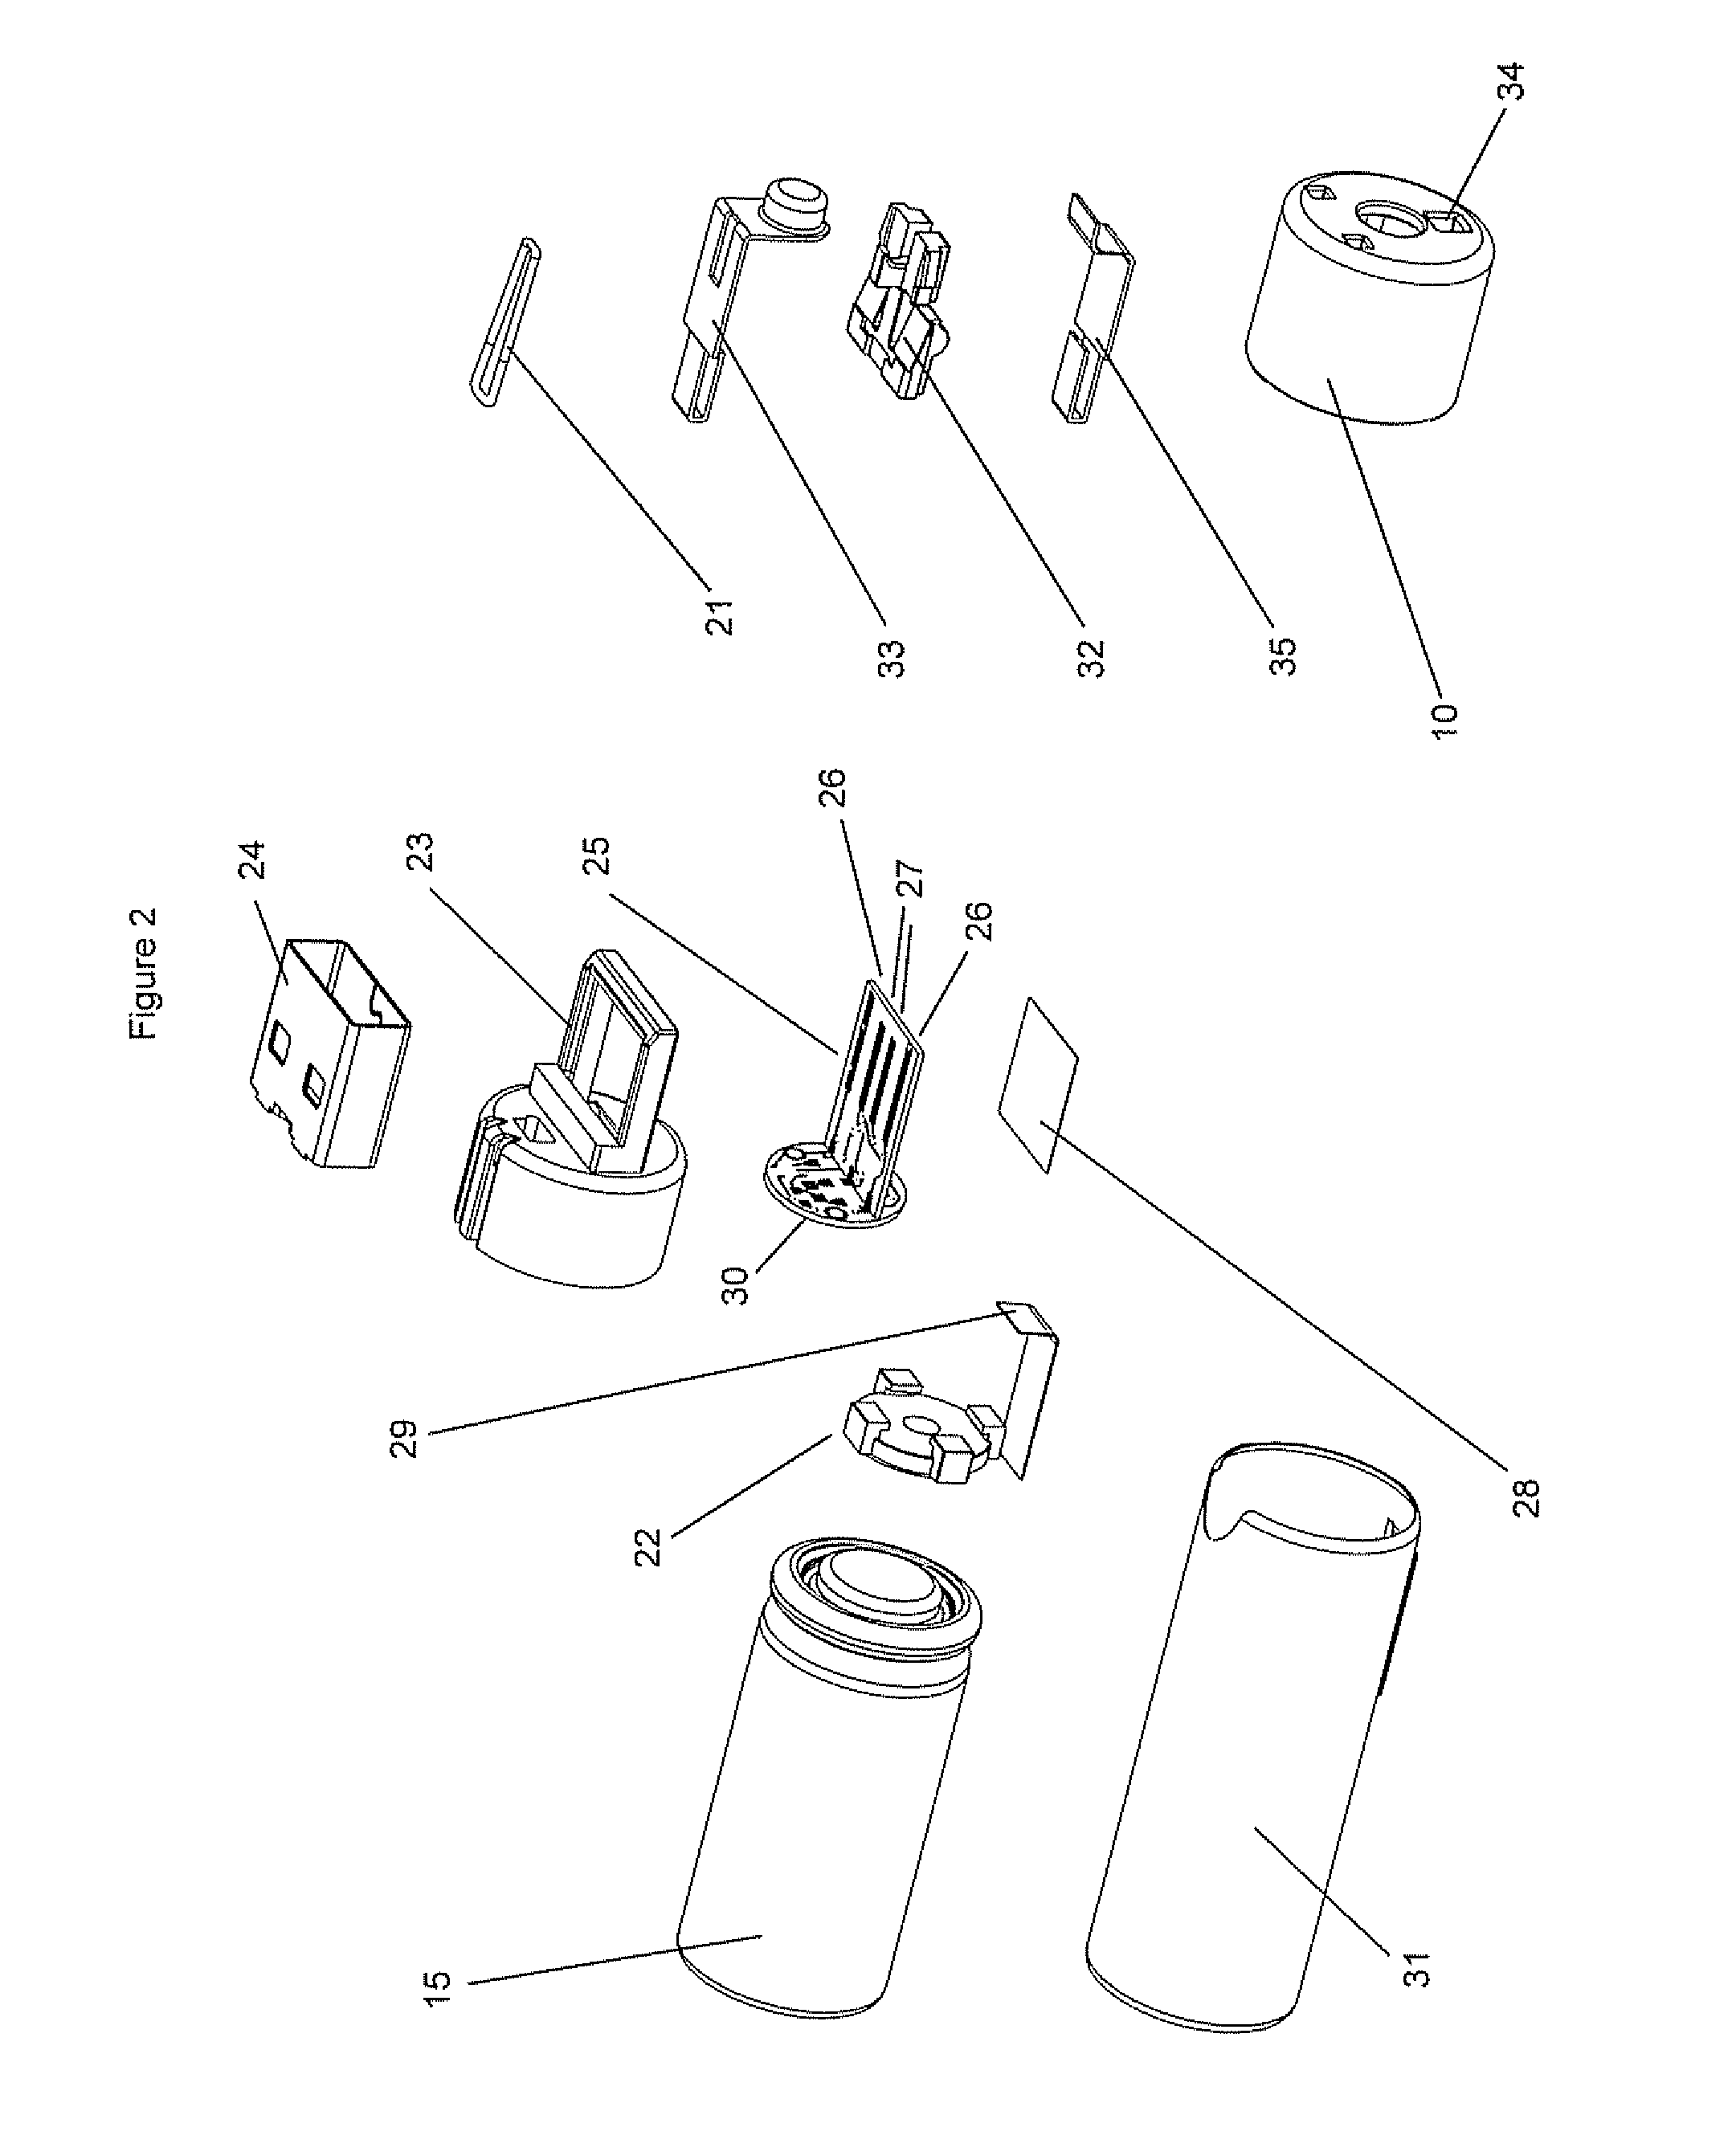 Rechargeable battery assembly